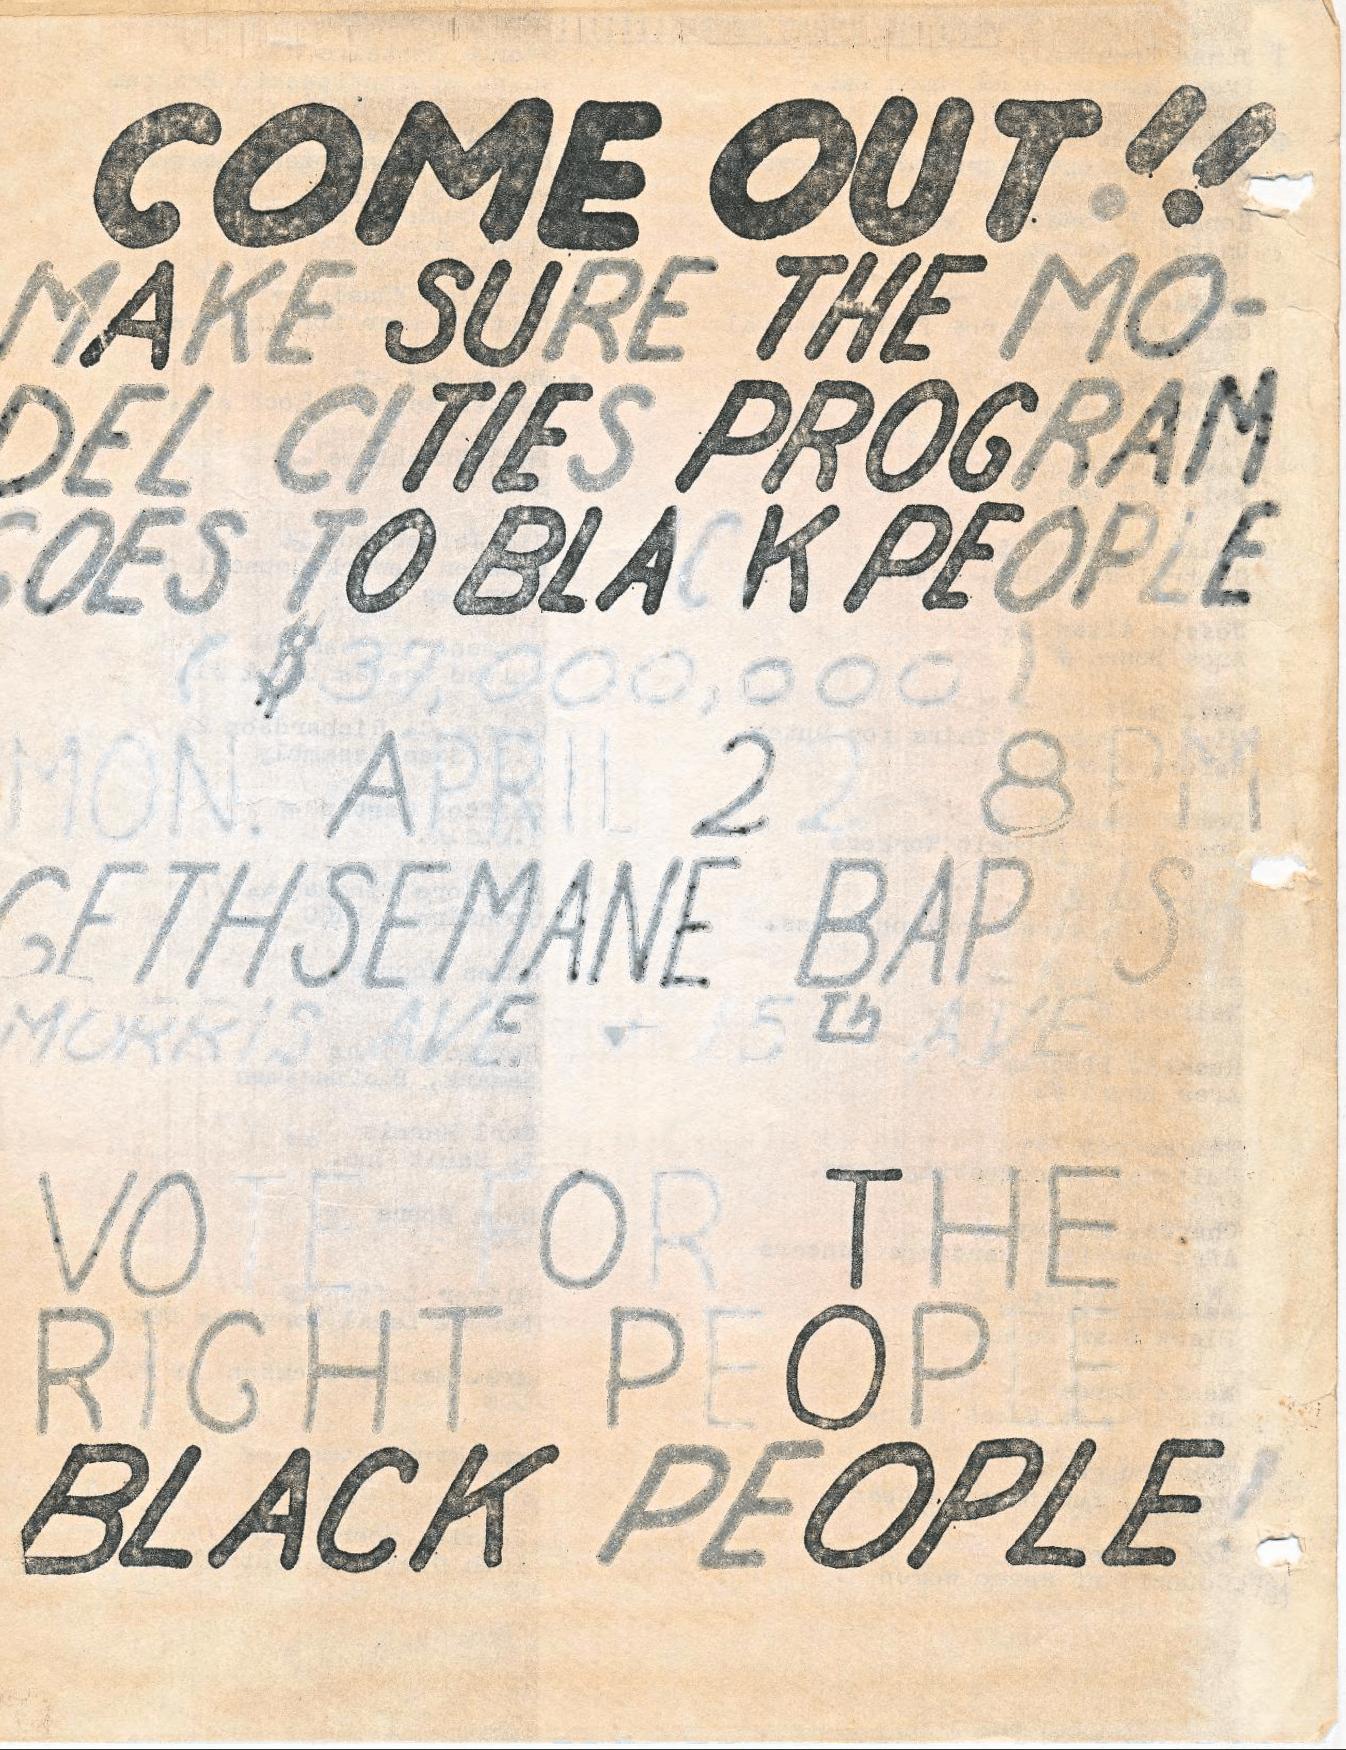 Model Cities Election Flyer (1968)